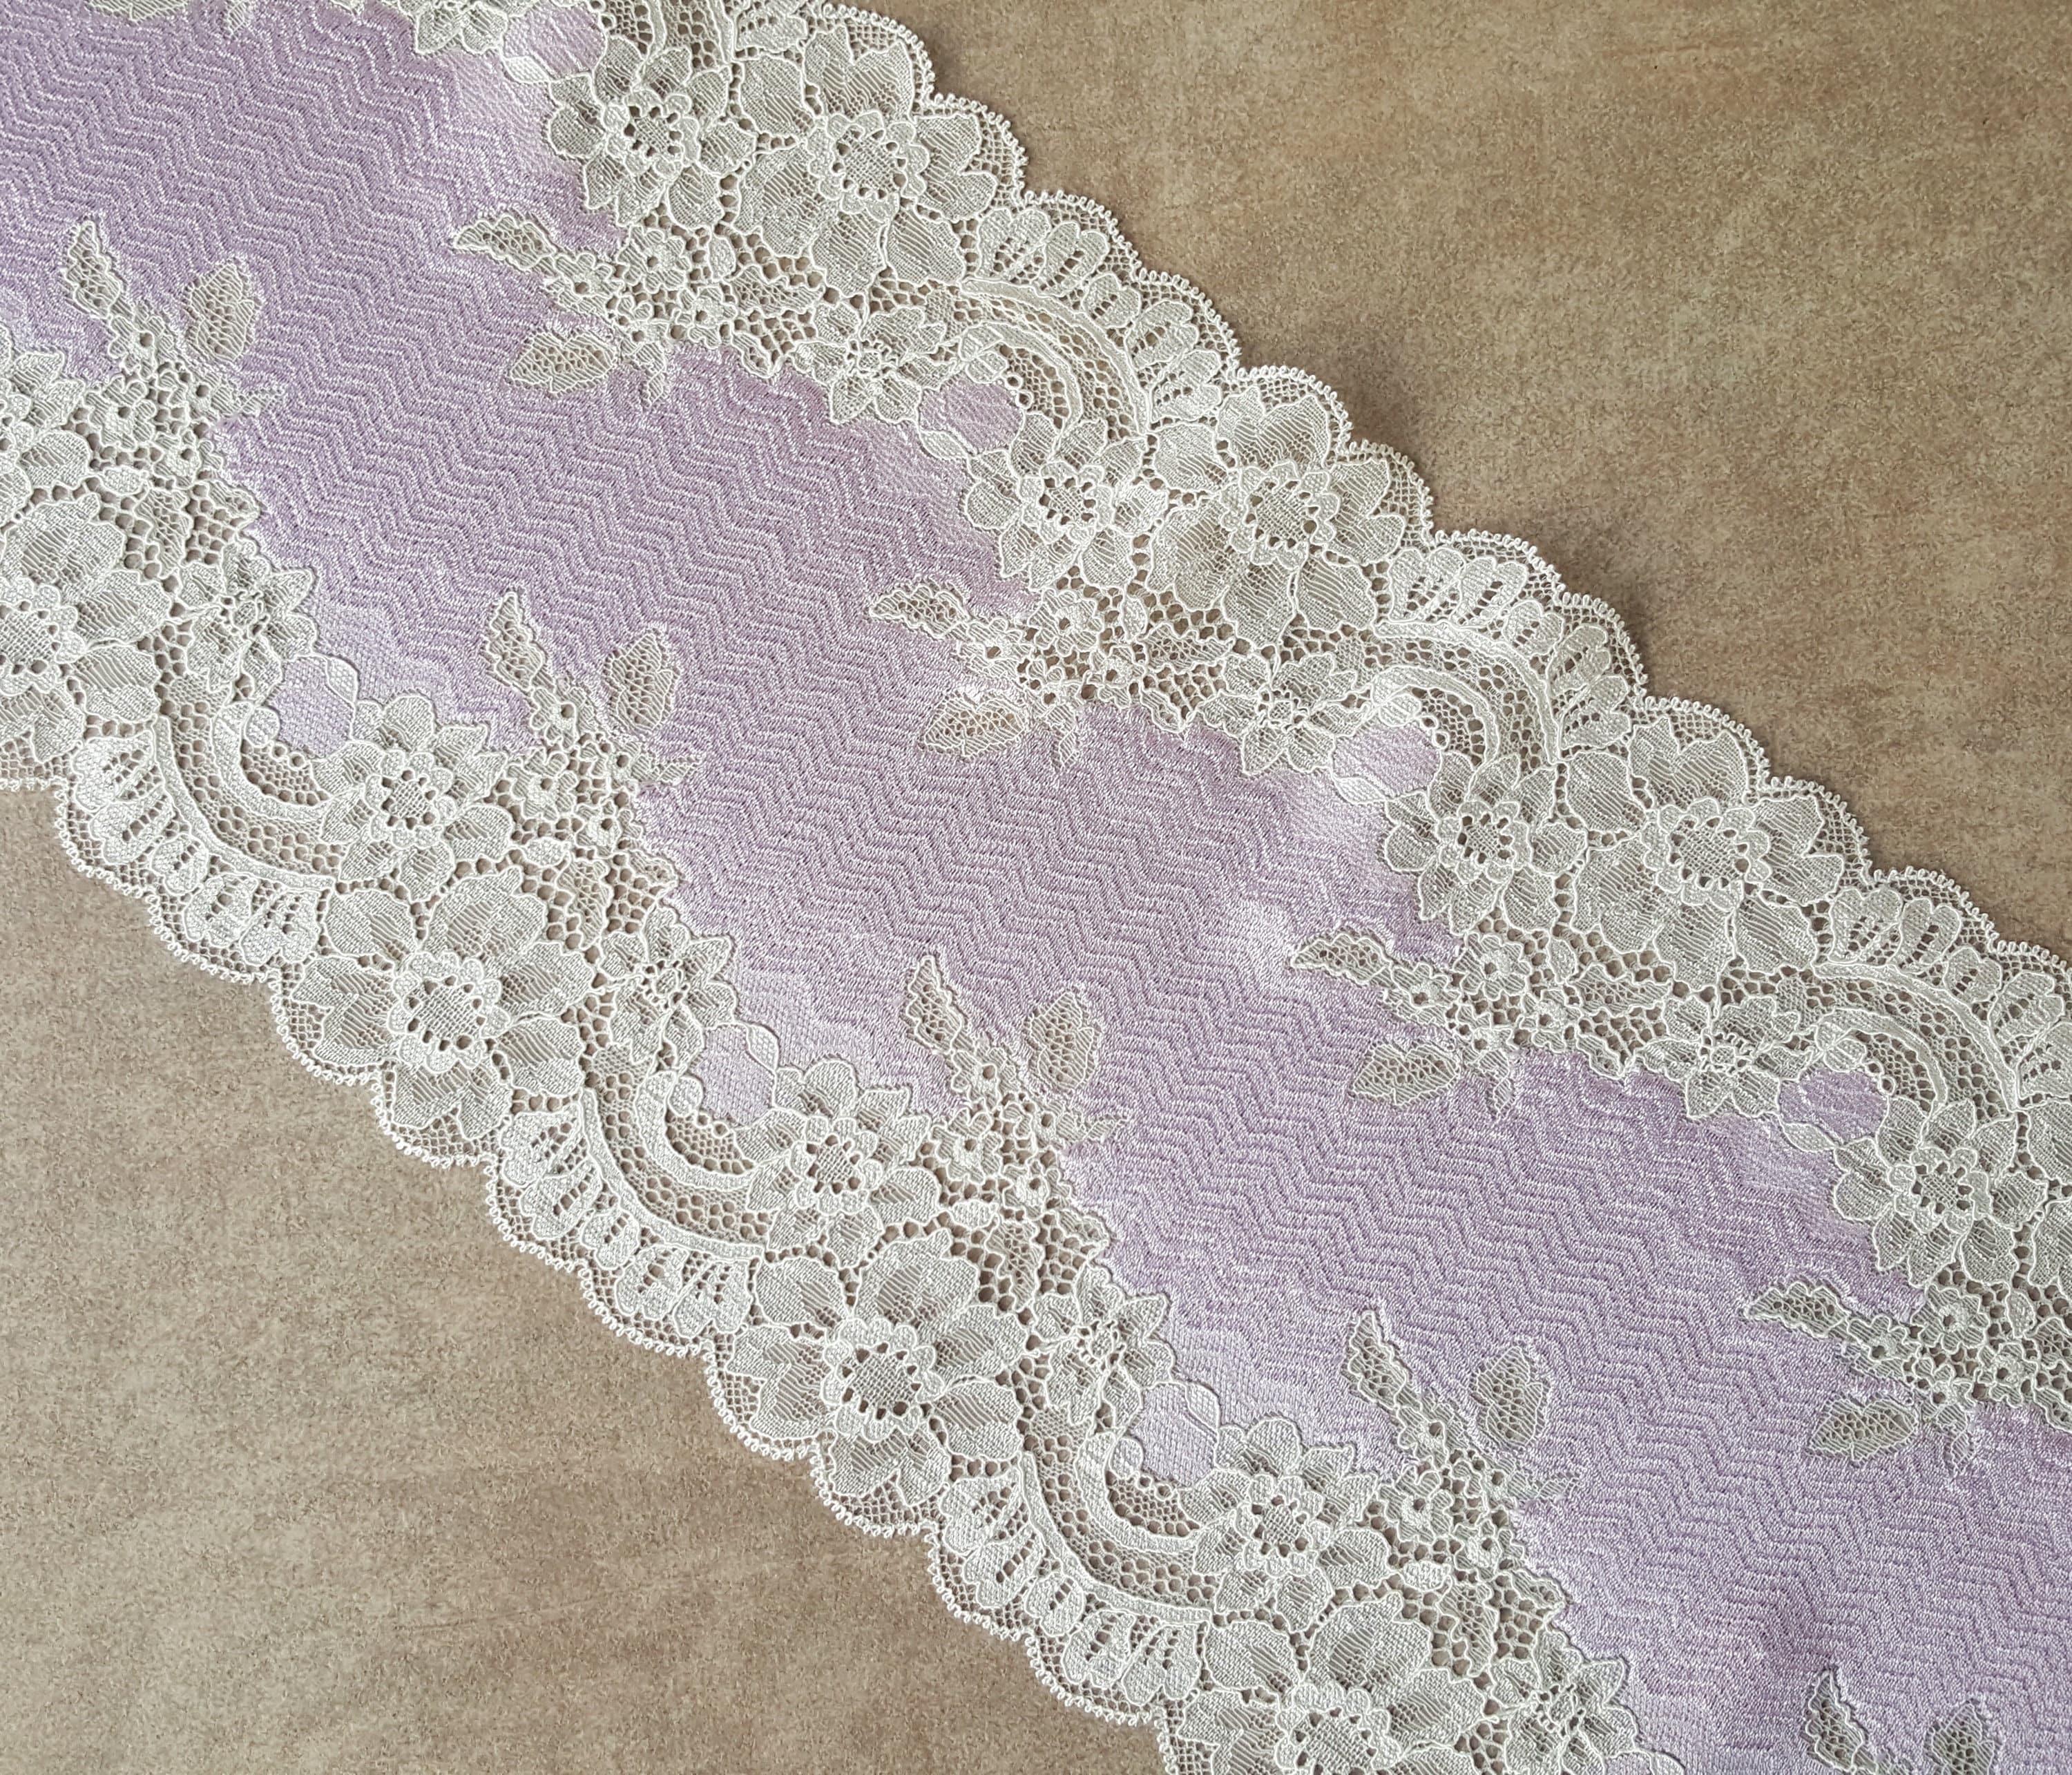 Pink Stretch Lace Trim Elastic Lace Fabric Wedding Lingerie - Etsy